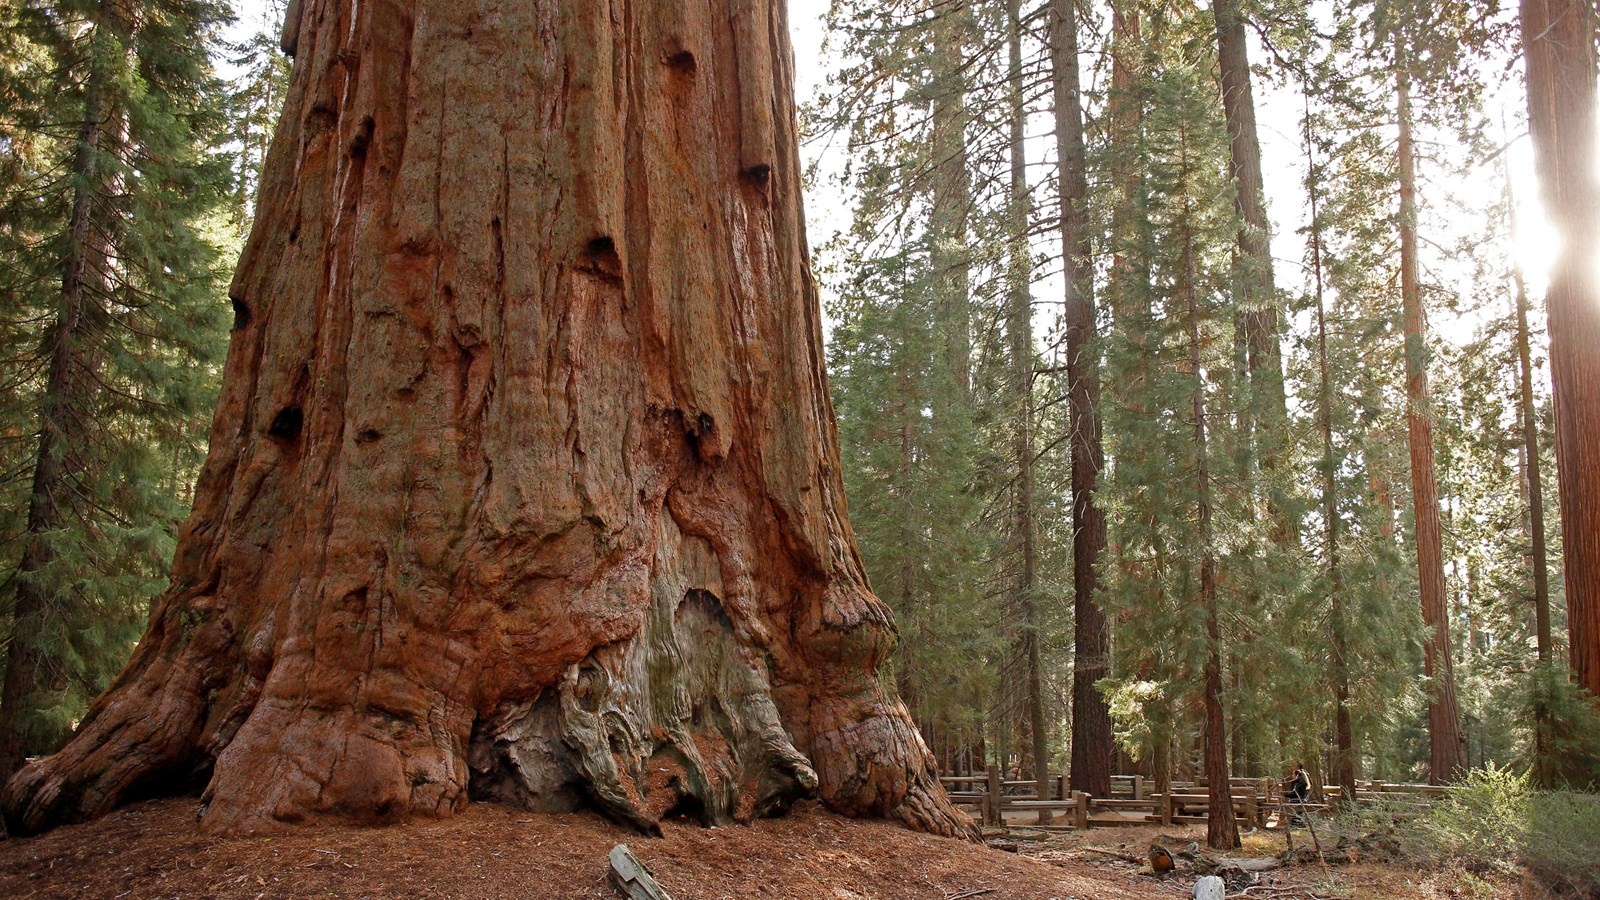 Sequoia trunk surrounded by much smaller trees